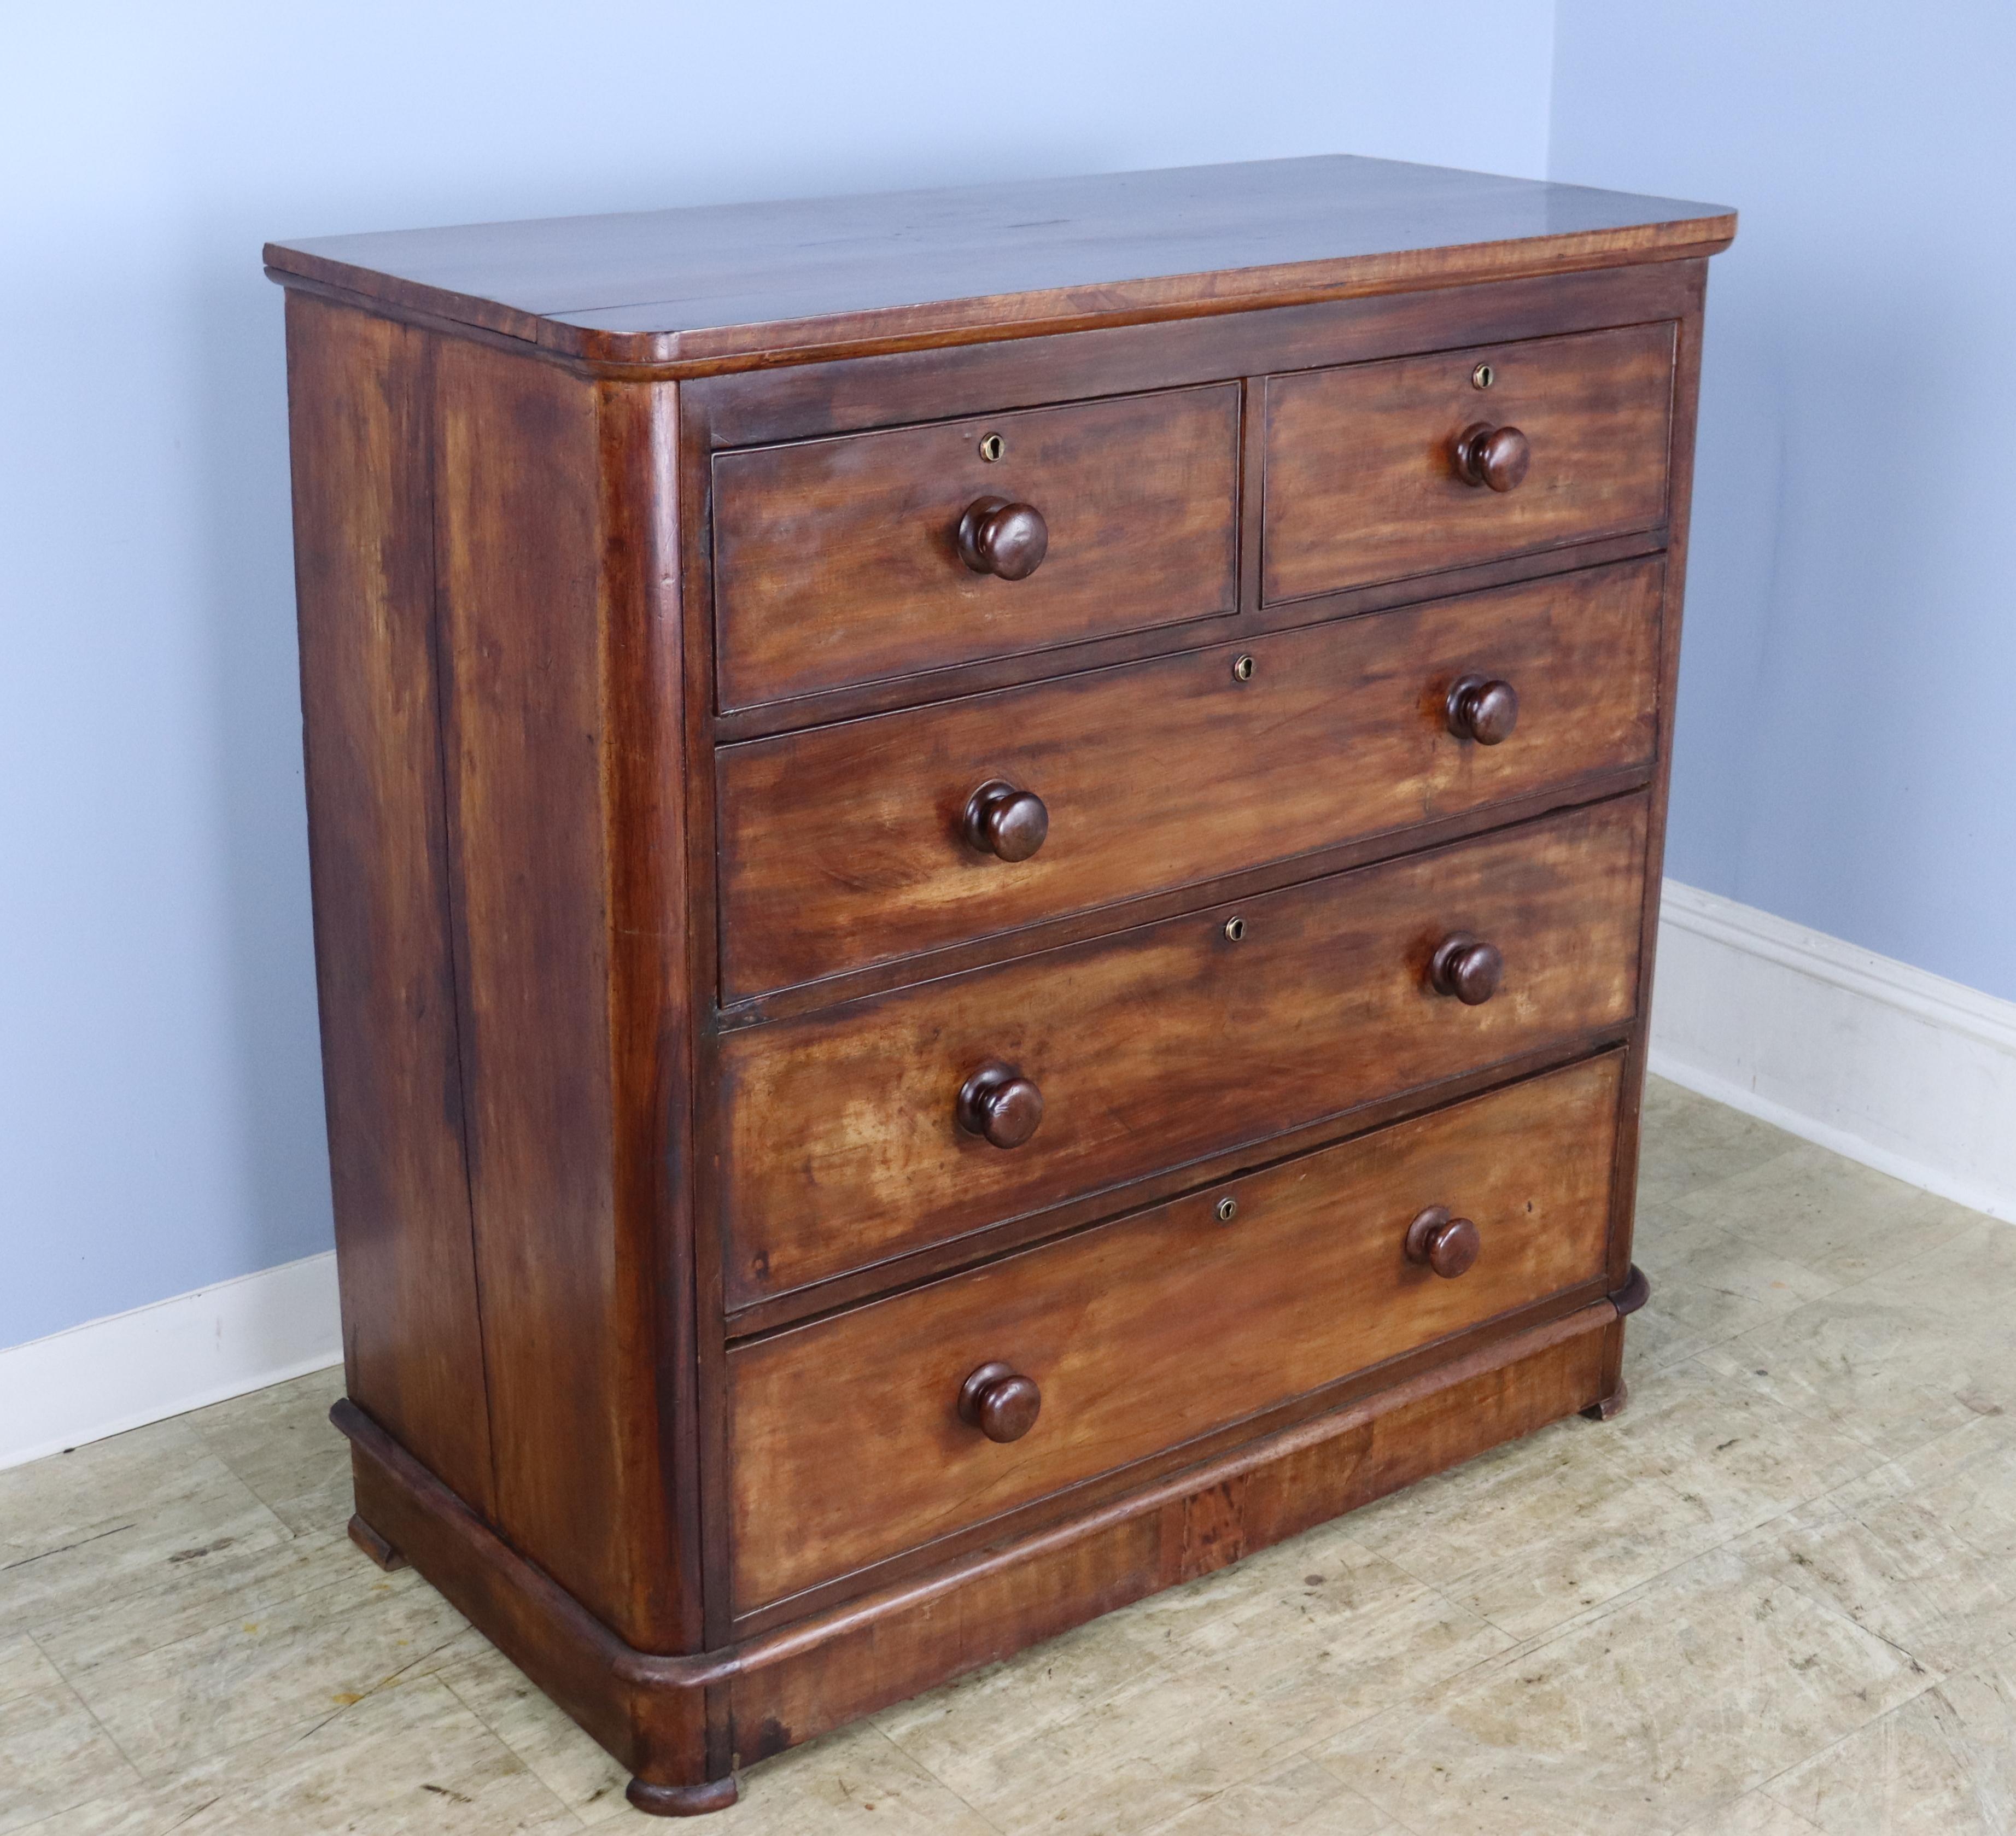 A large chest of drawers in rich mahogany, with very deep drawers and stylish glossy knobs.  The plinth at the bottom opens with the bottom drawer, a fun detail.  The brass keyholes are original although there are no keys.  There is some light wear